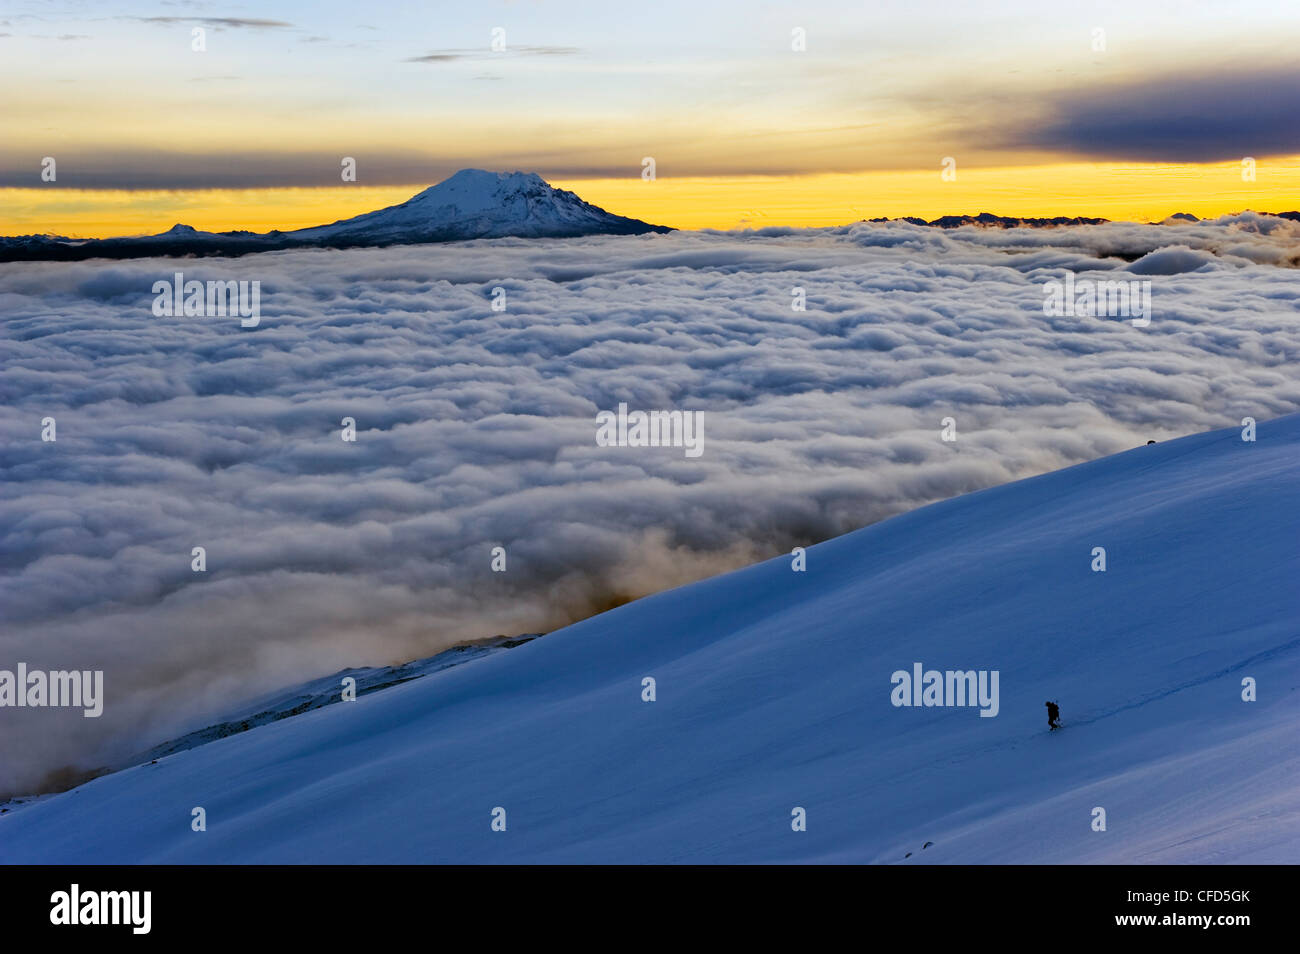 View from Volcan Cotopaxi, 5897m, highest active volcano in the world, Ecuador, South America Stock Photo